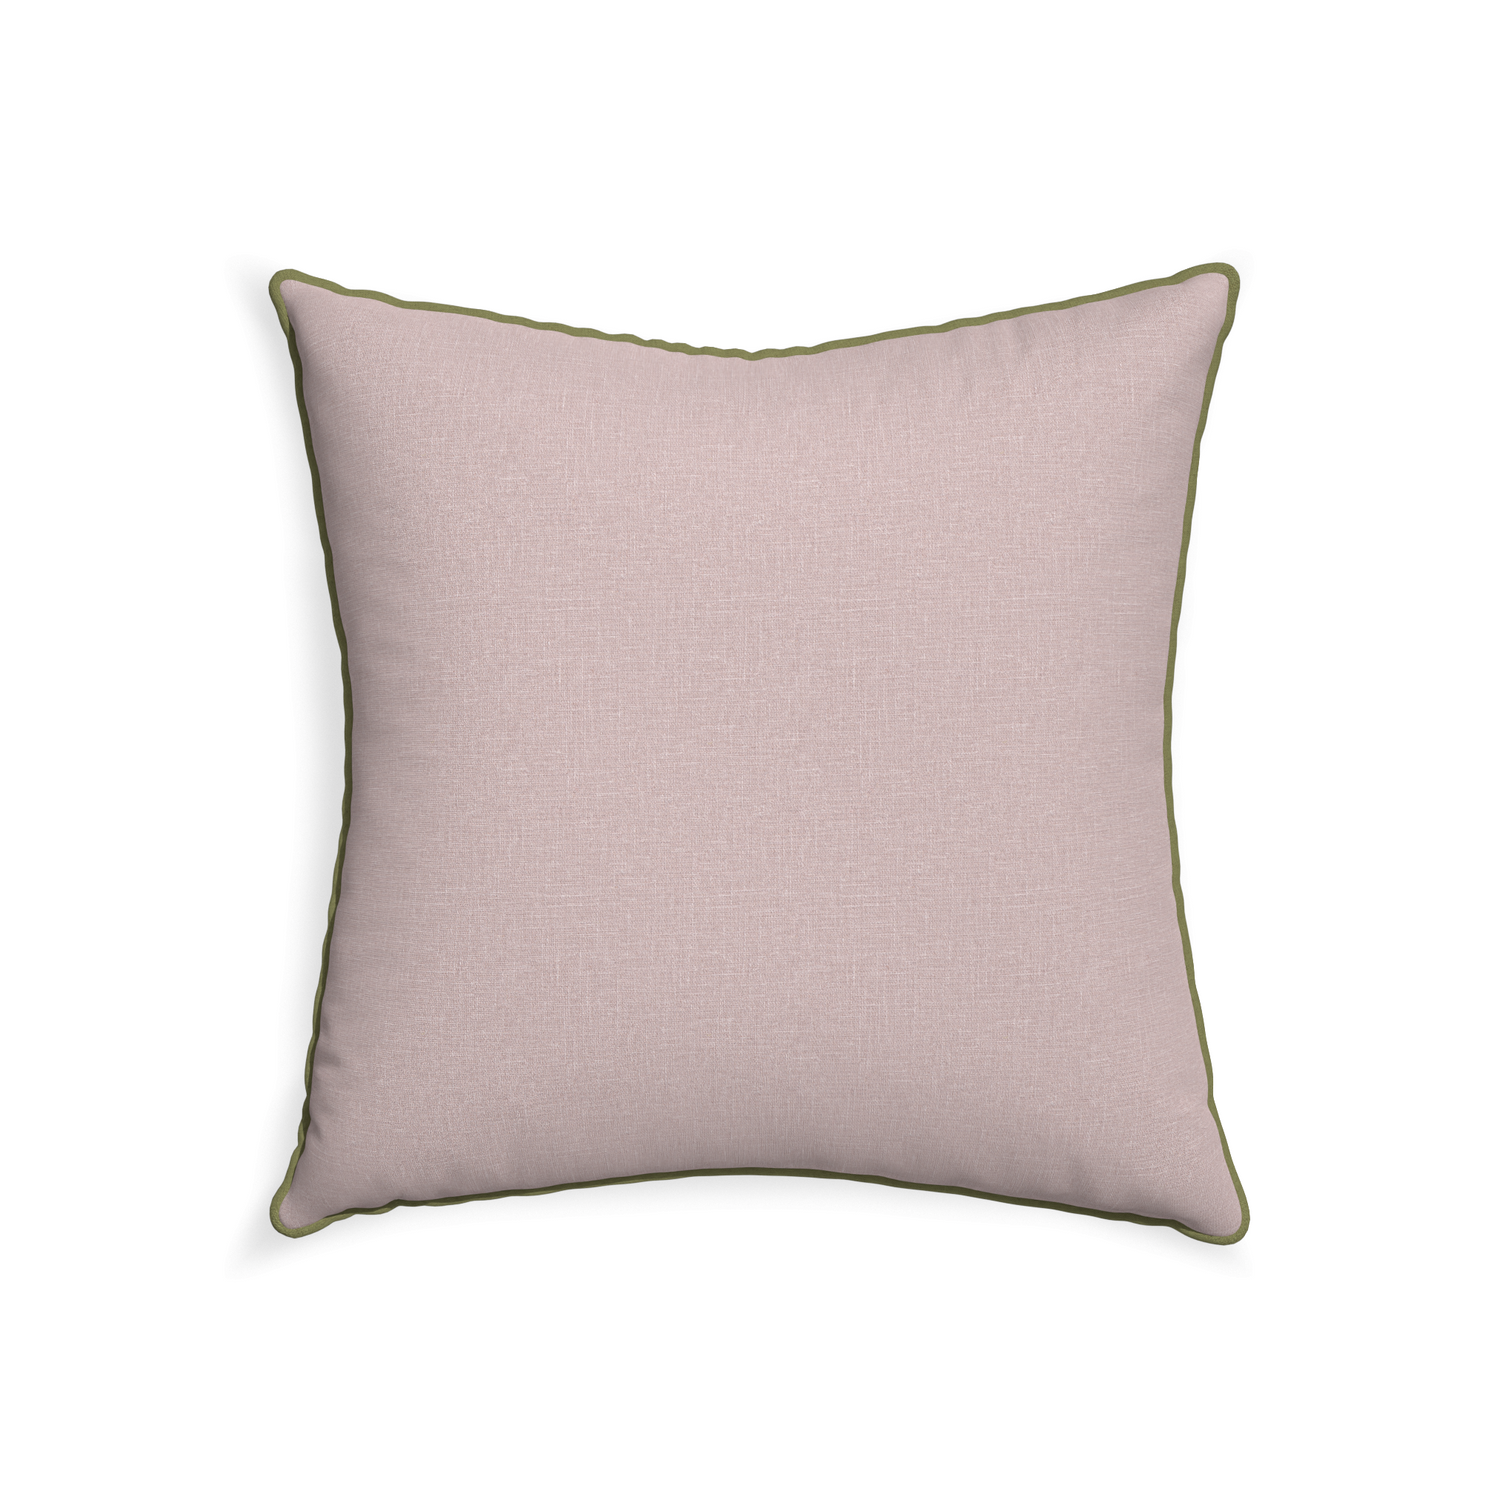 22-square orchid custom mauve pinkpillow with moss piping on white background